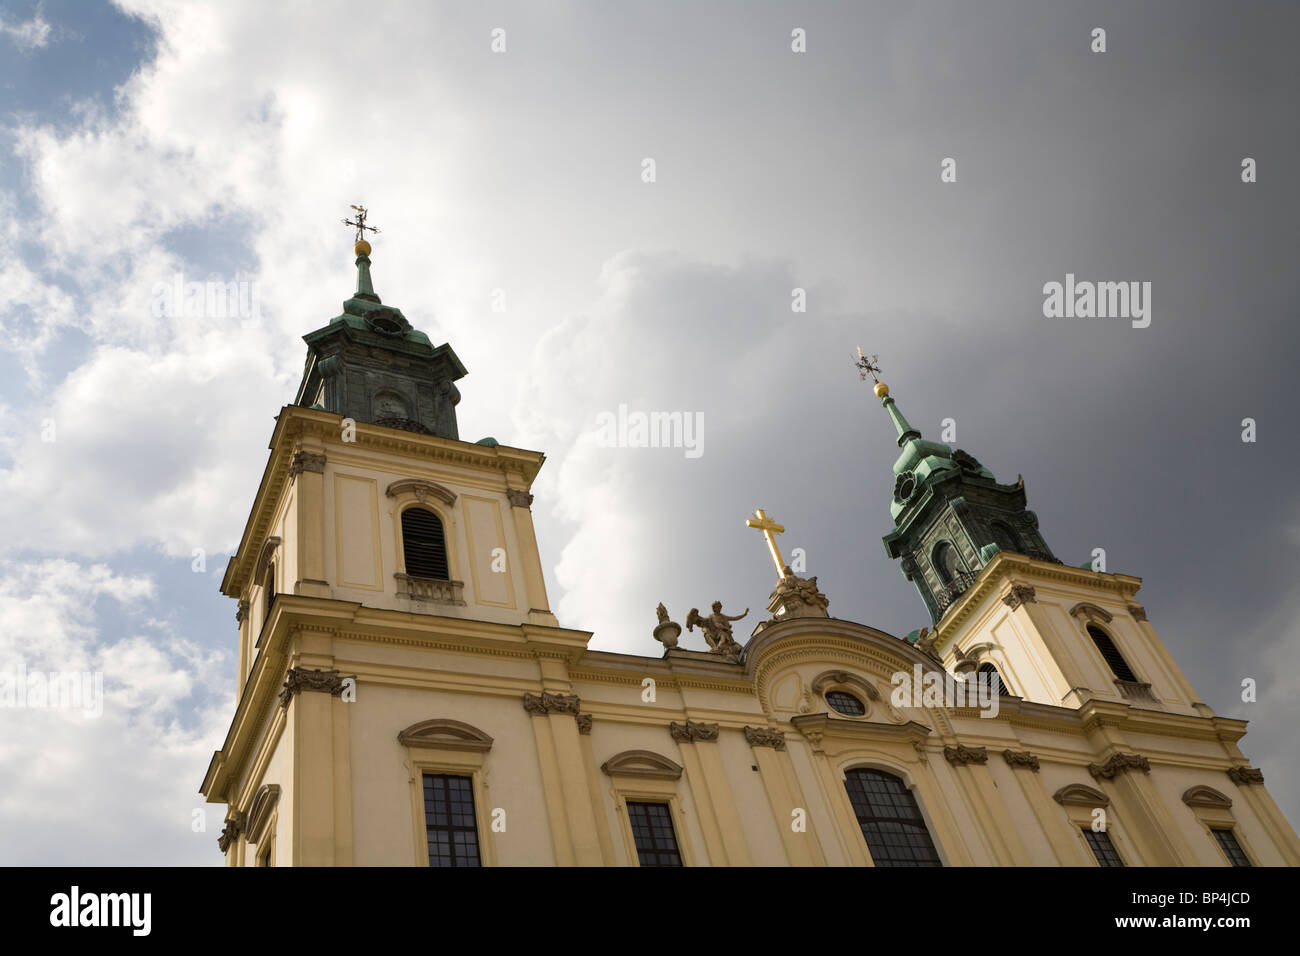 Holy Cross Church on Krakowskie Przedmiescie street is one of the most notable baroque churches in Warsaw, Poland. Stock Photo